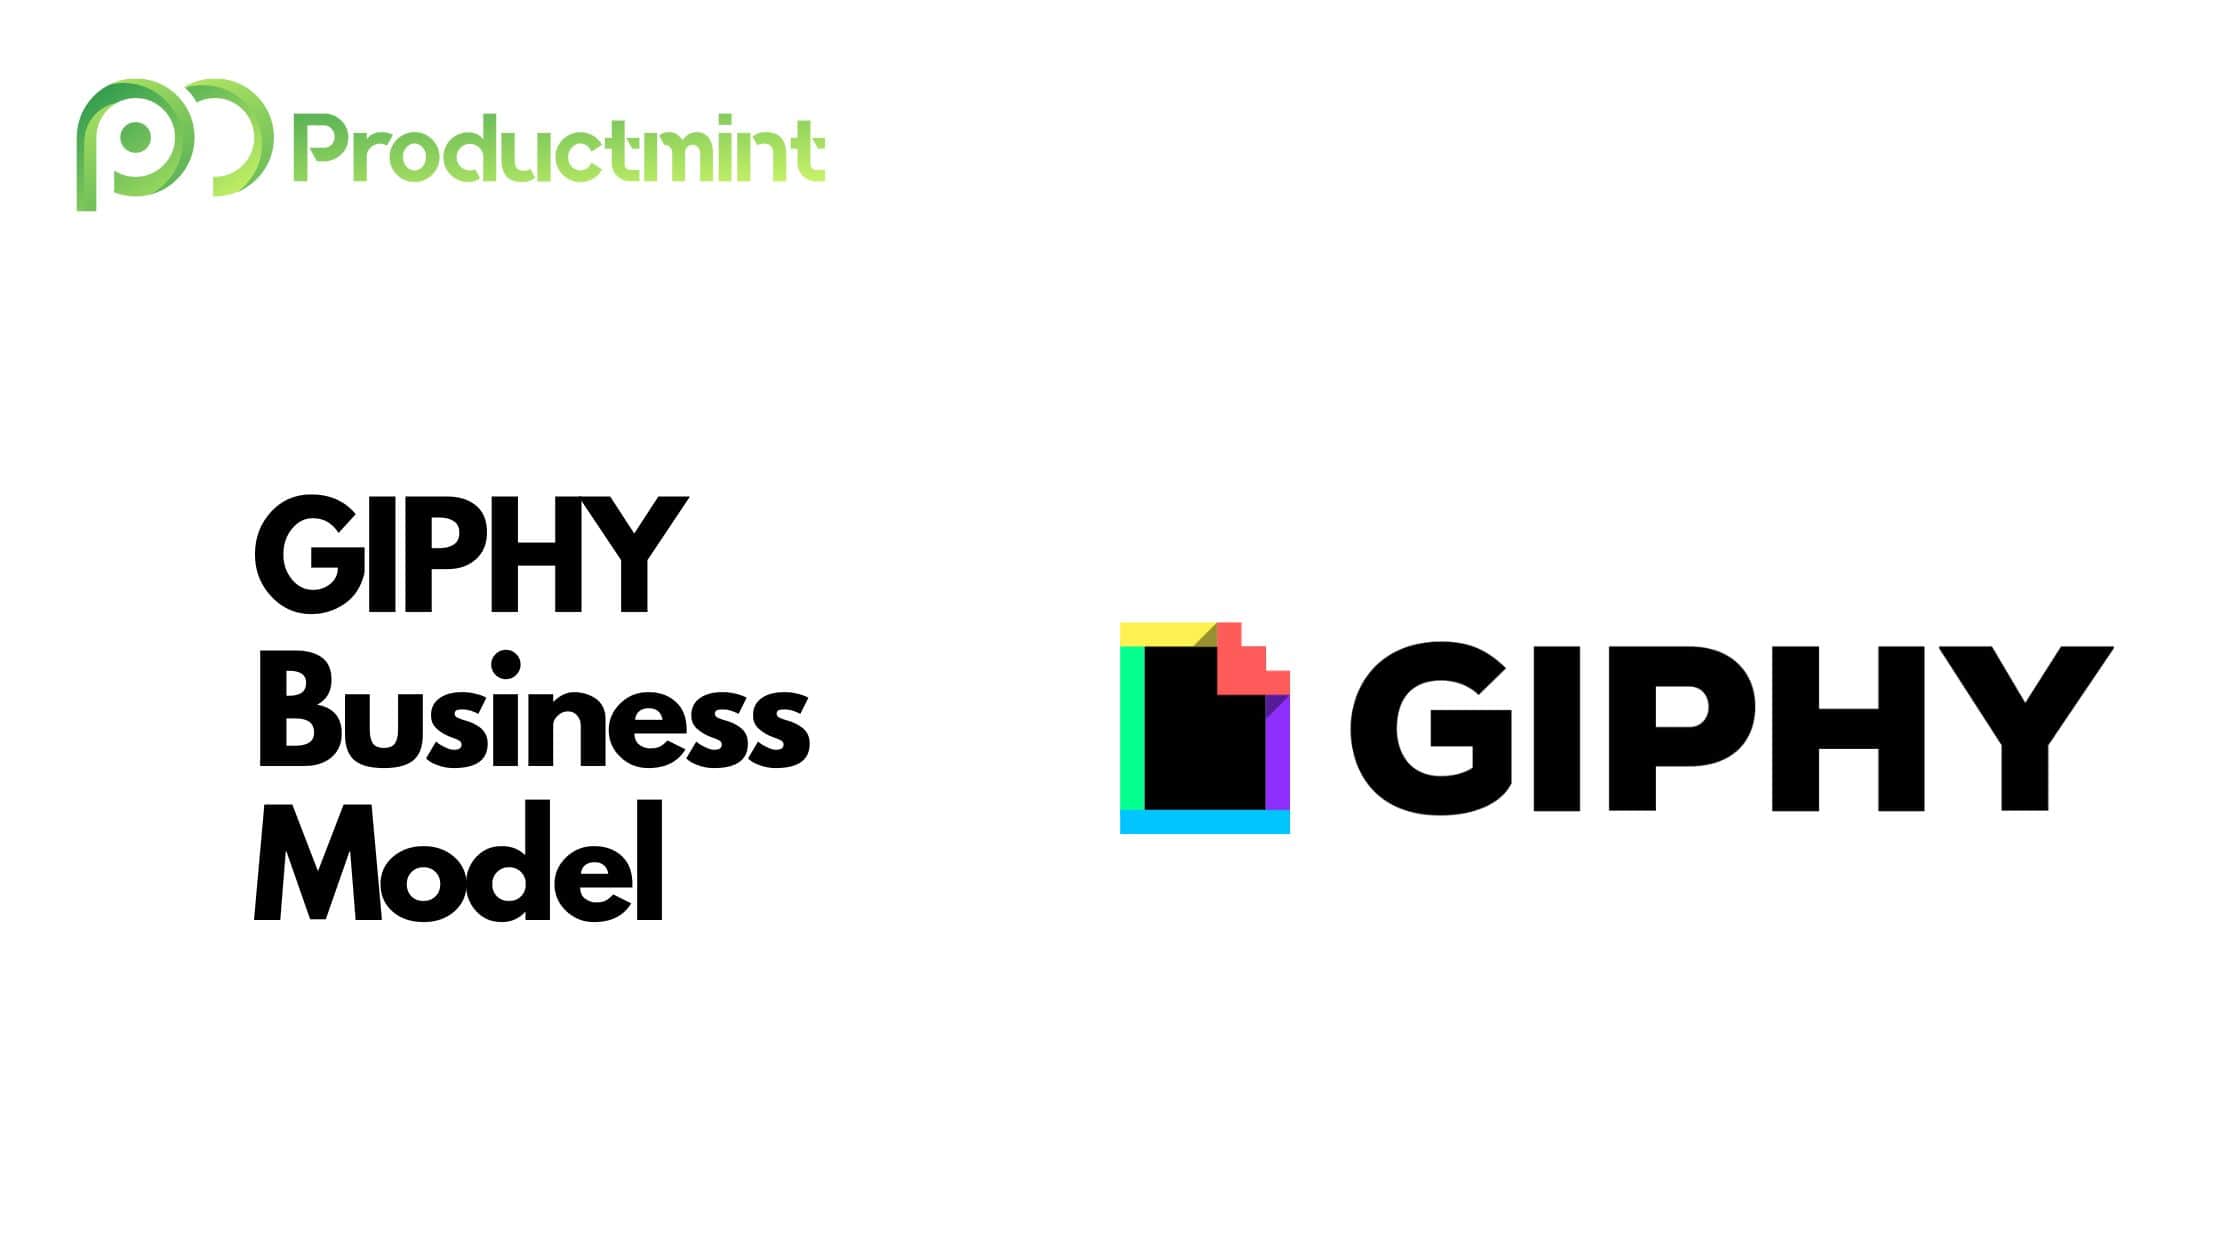 GIPHY Business Model